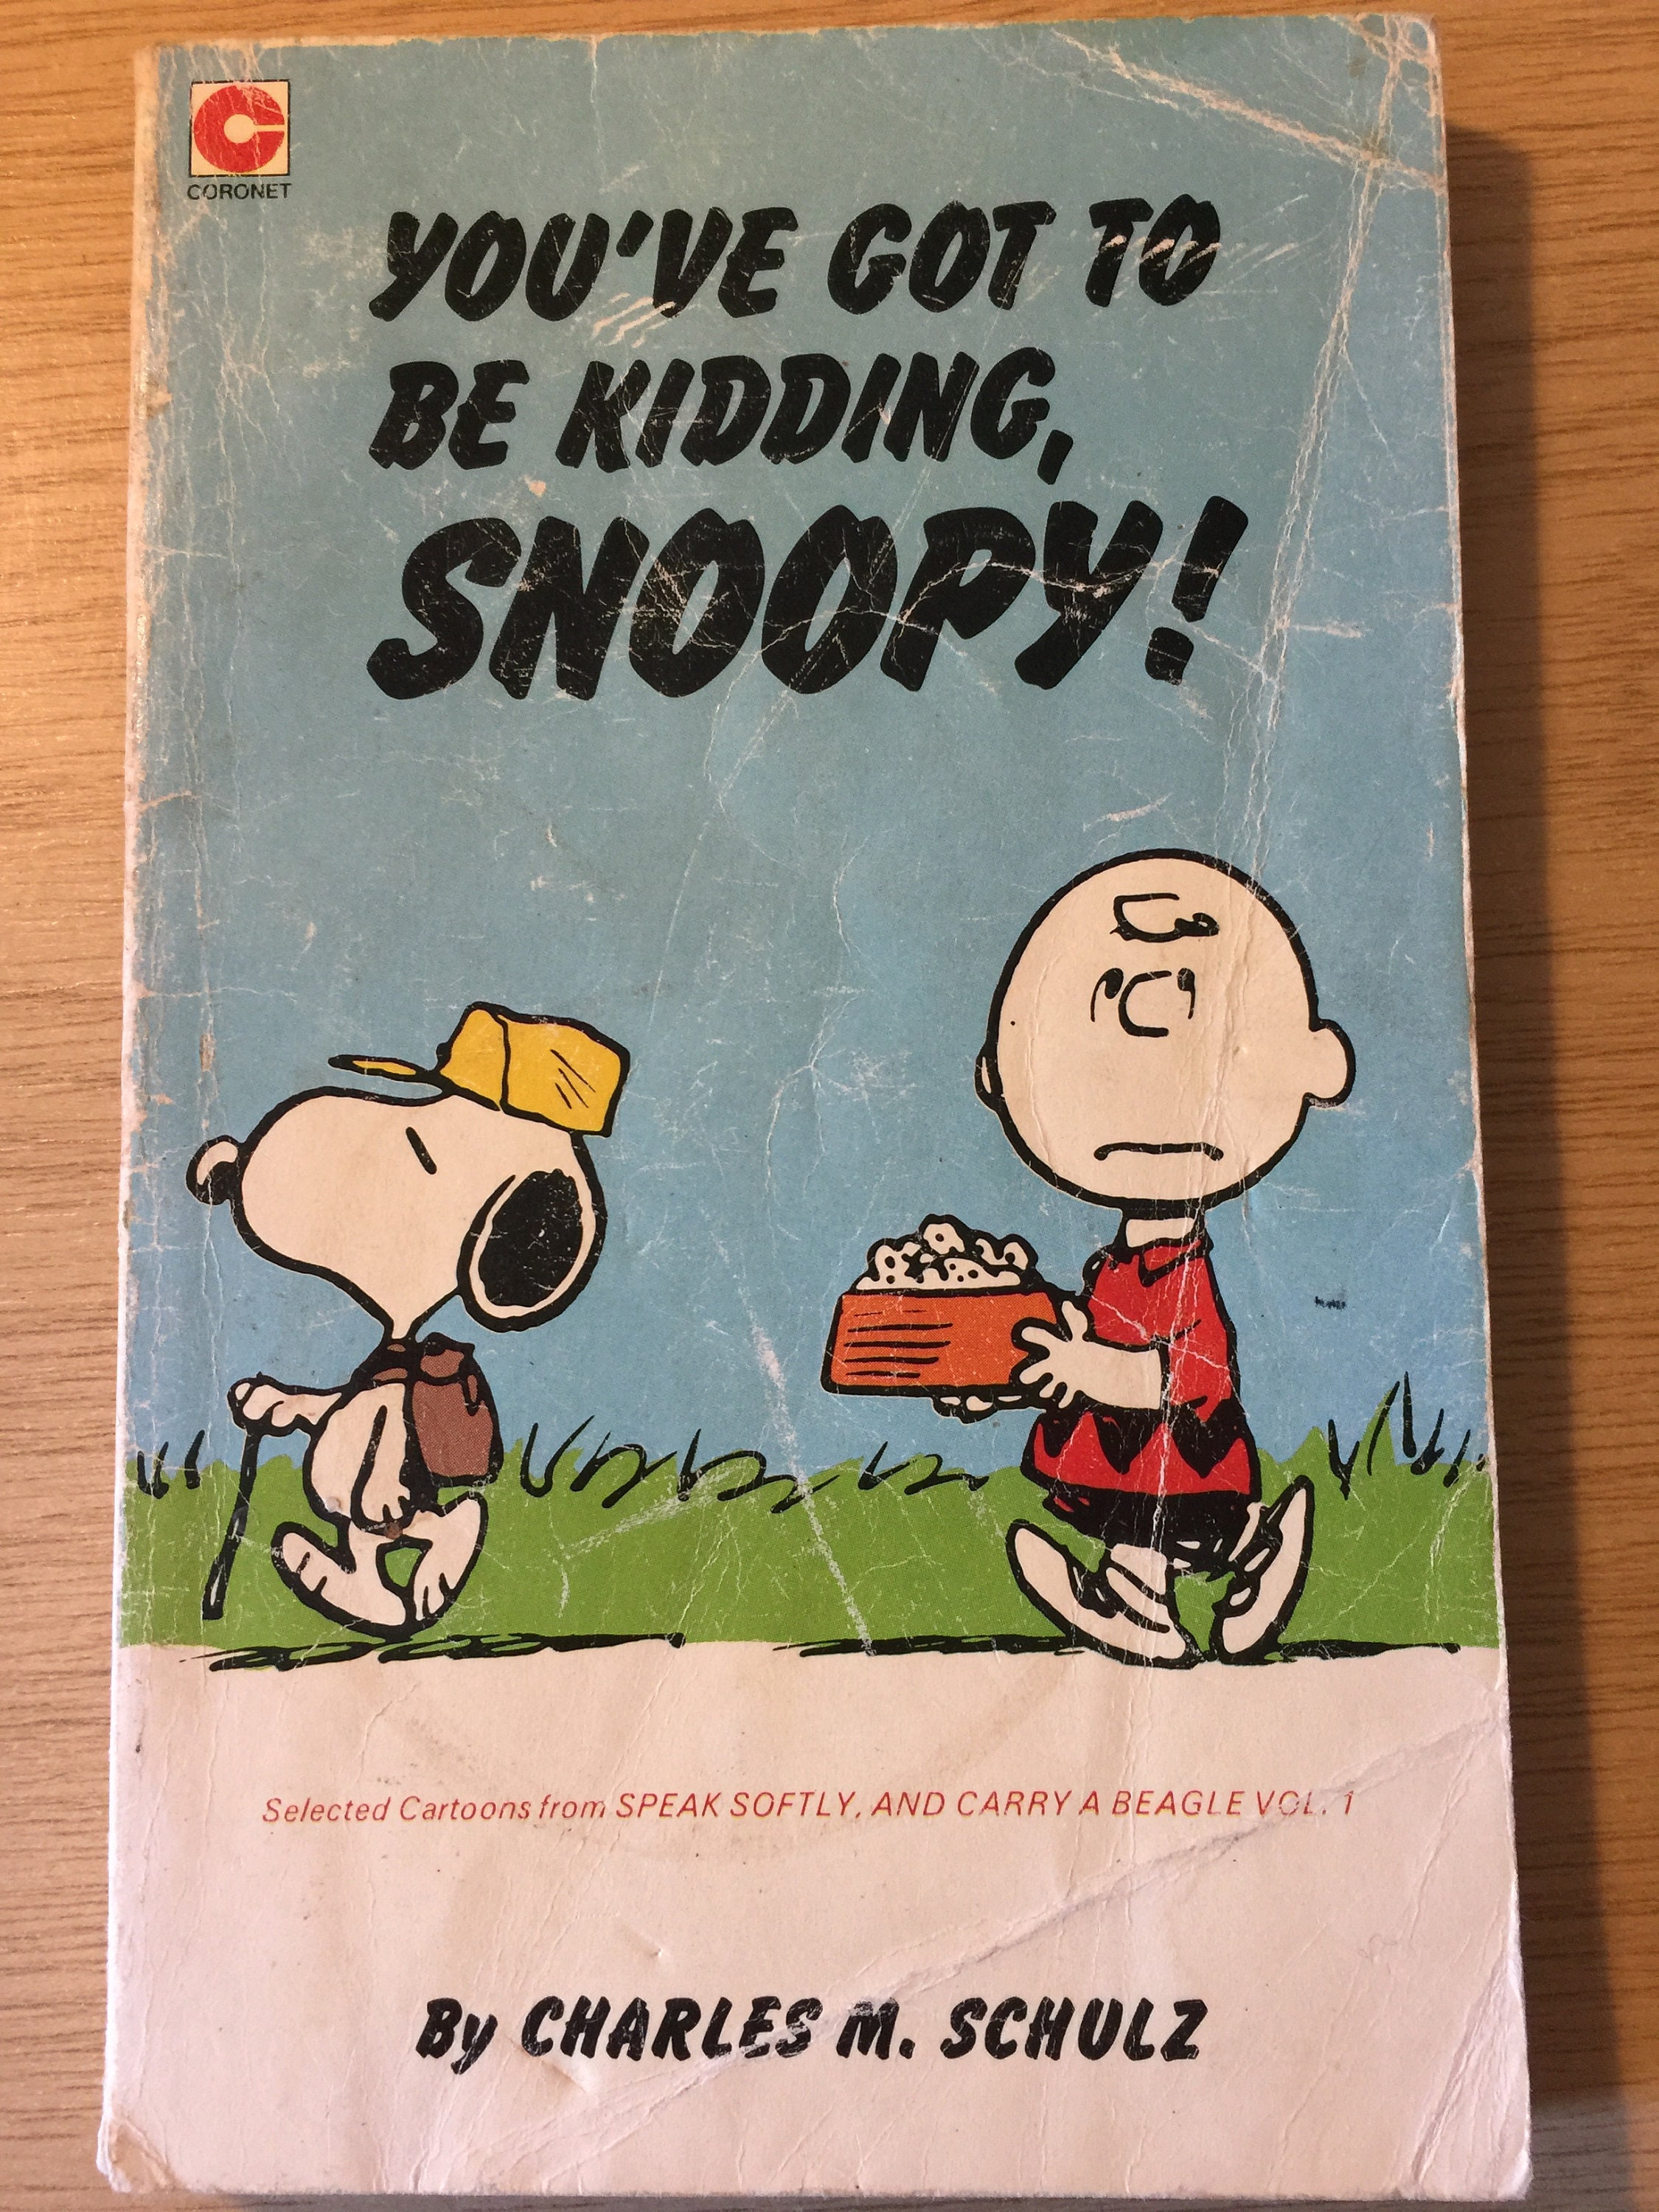 RARE Vintage 1979 Snoopy Book 'You've Got To be | Etsy